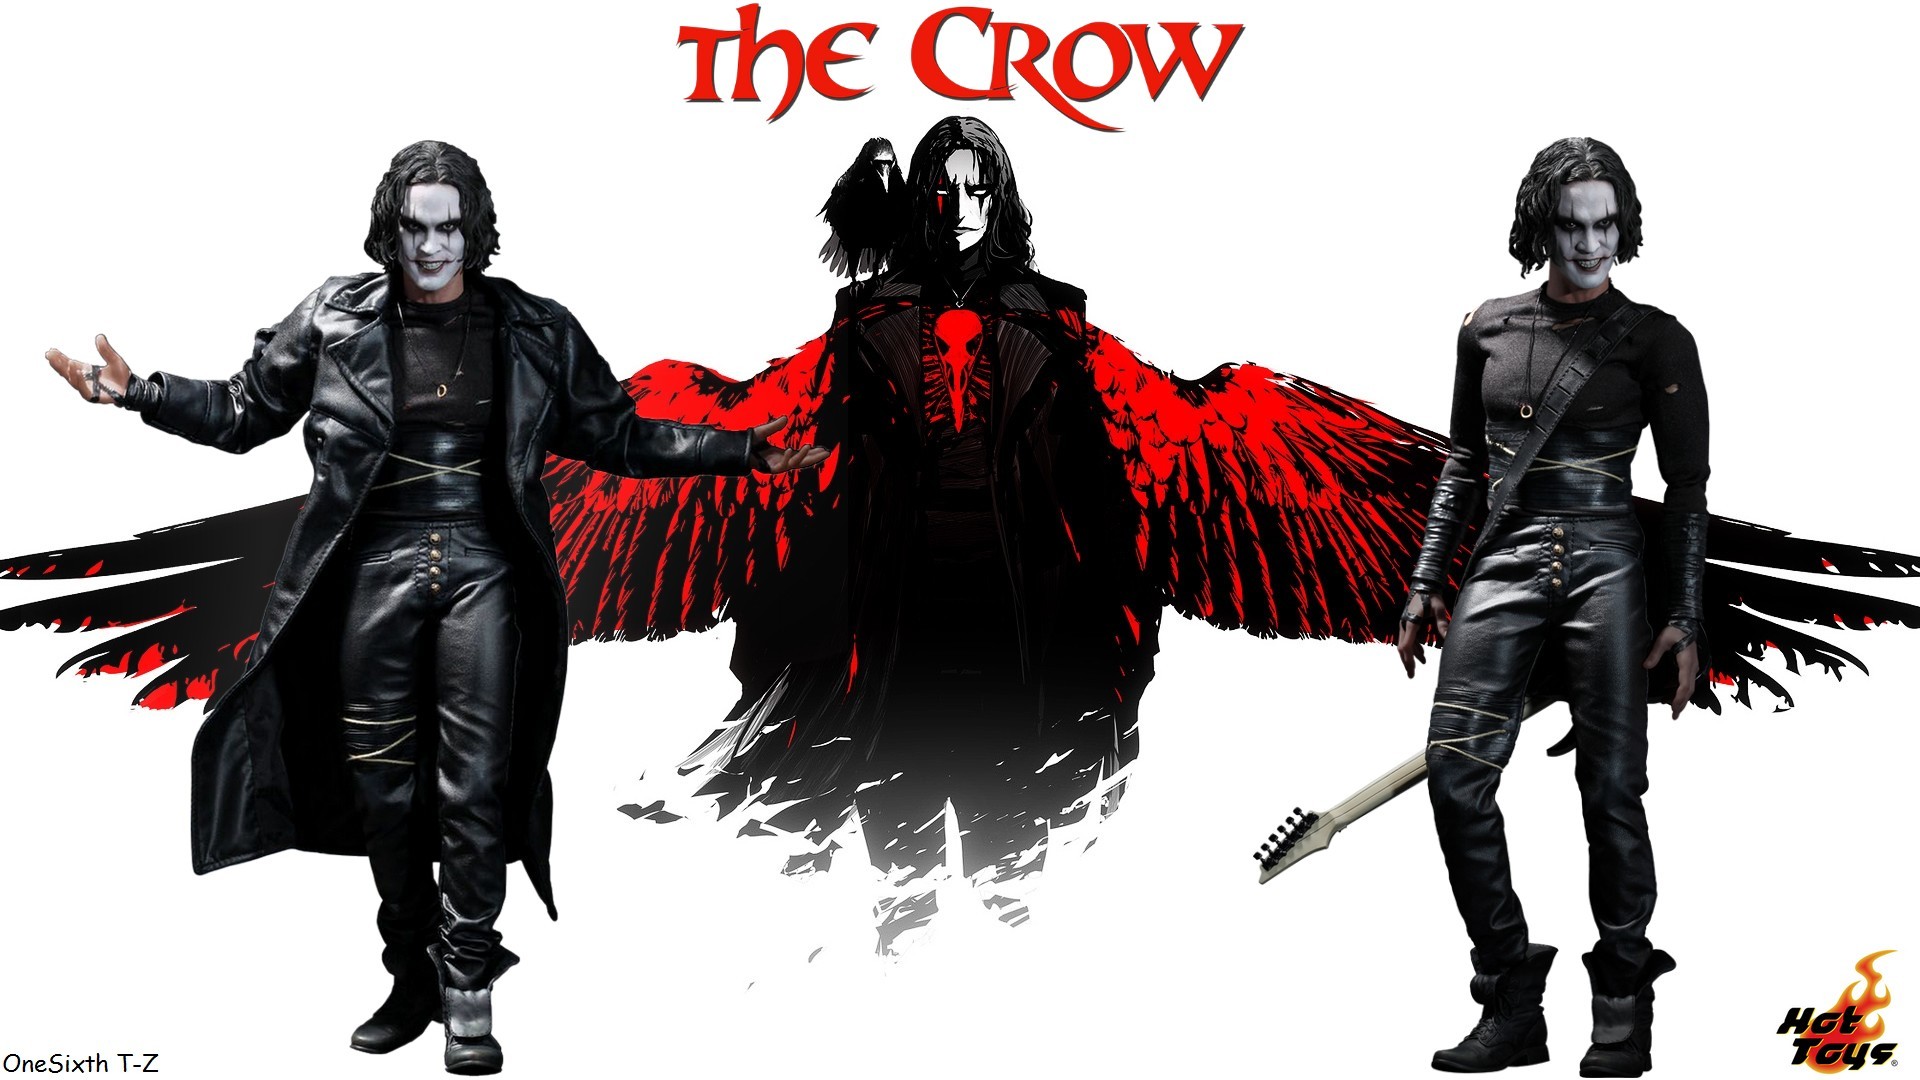 1920x1080 the crow hd wallpaper by onesixth t z hot toys the crow hd wallpaper .